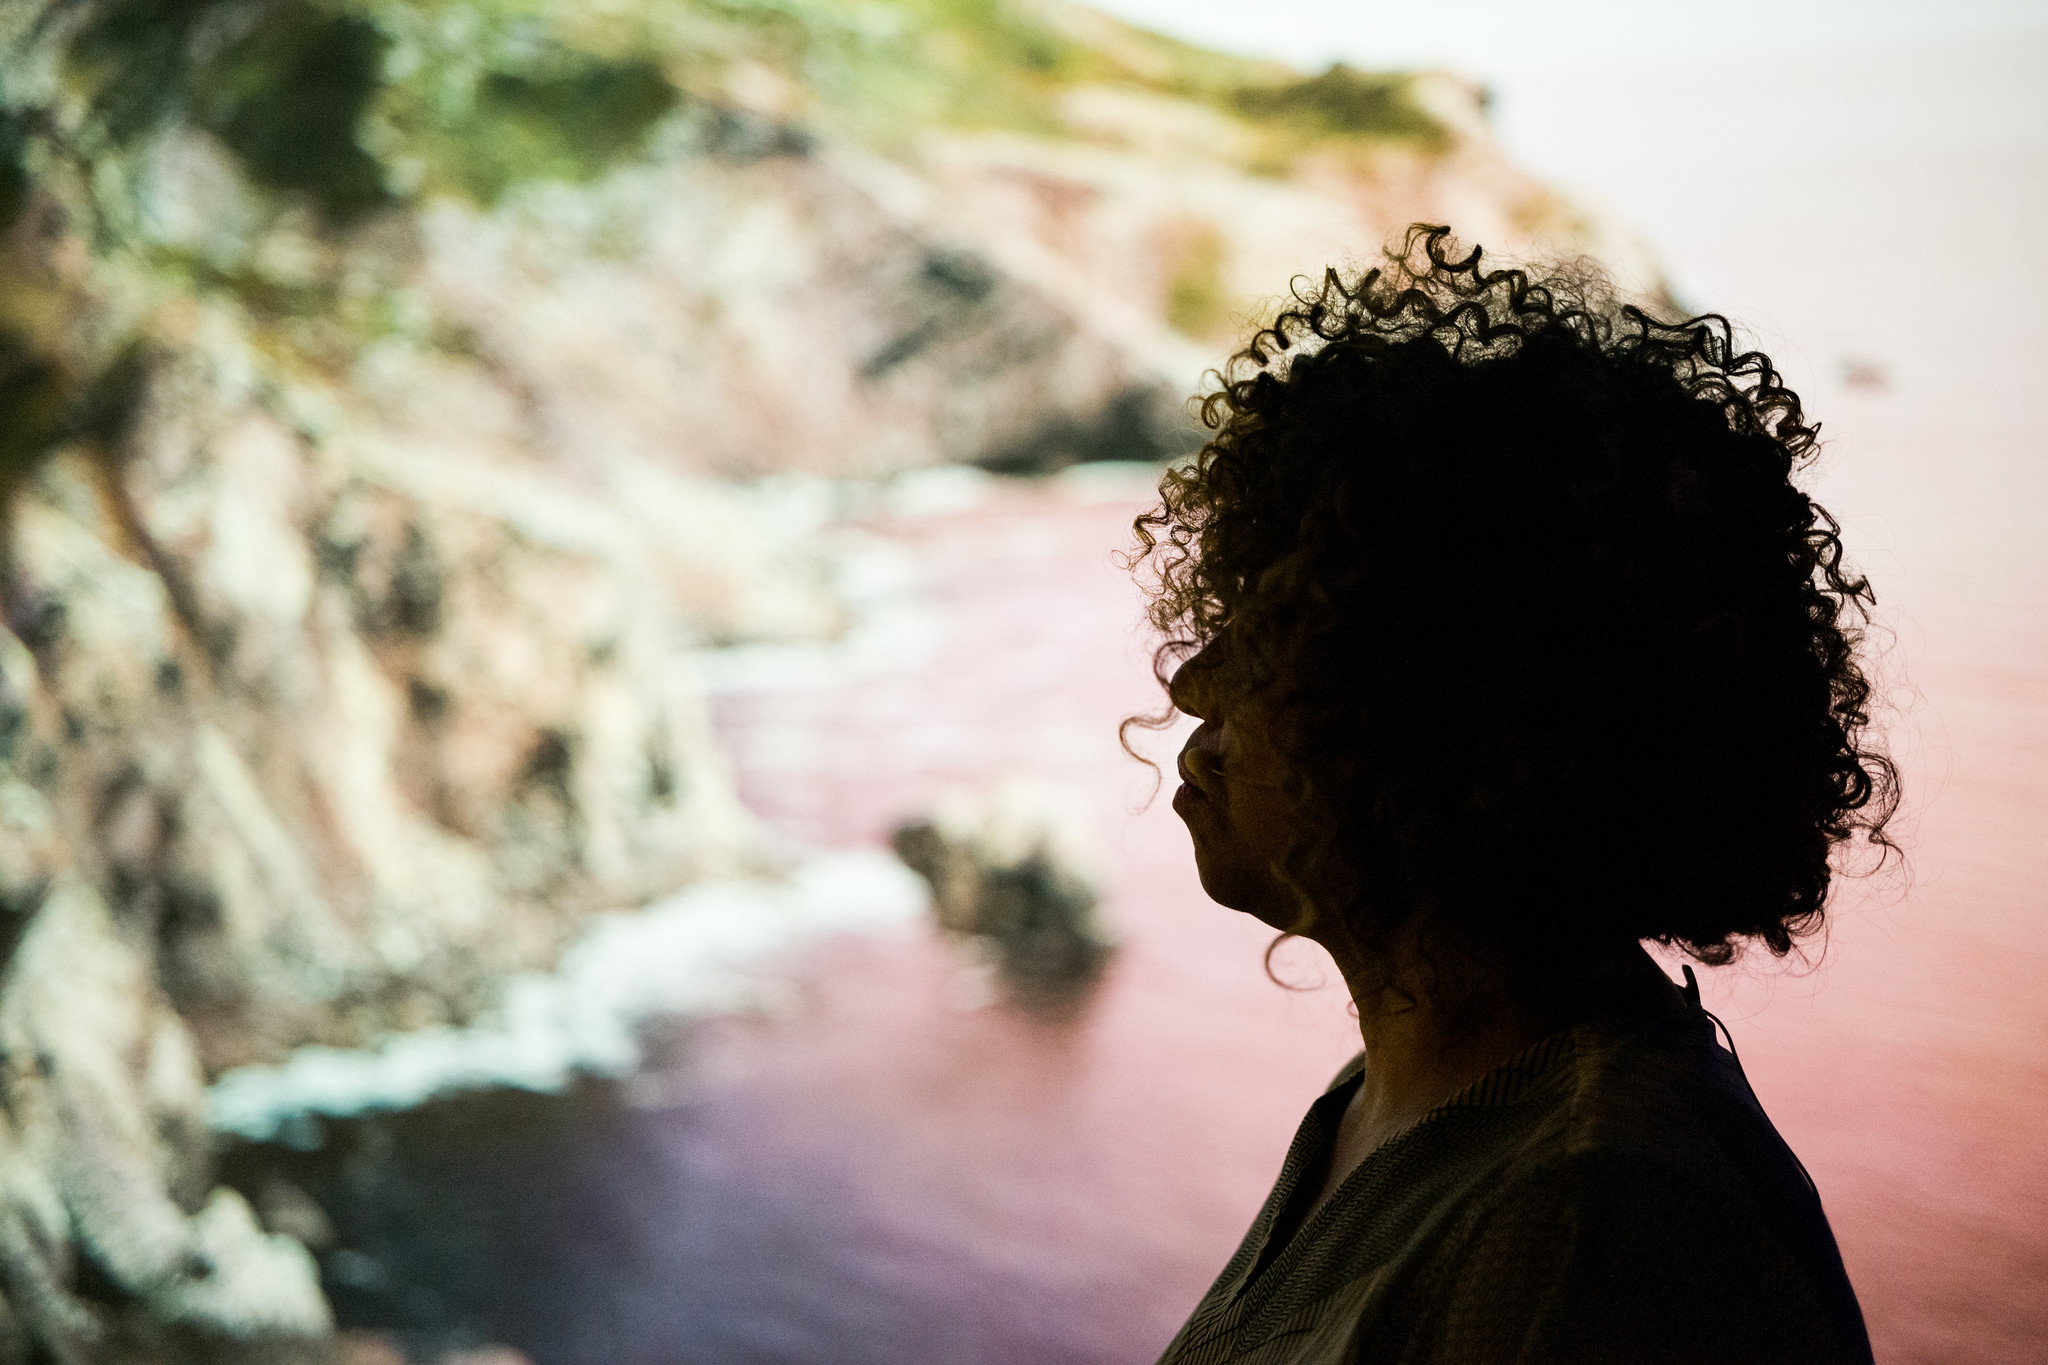 A curly-haired person is silhouetted against a blurry image of cliffs.